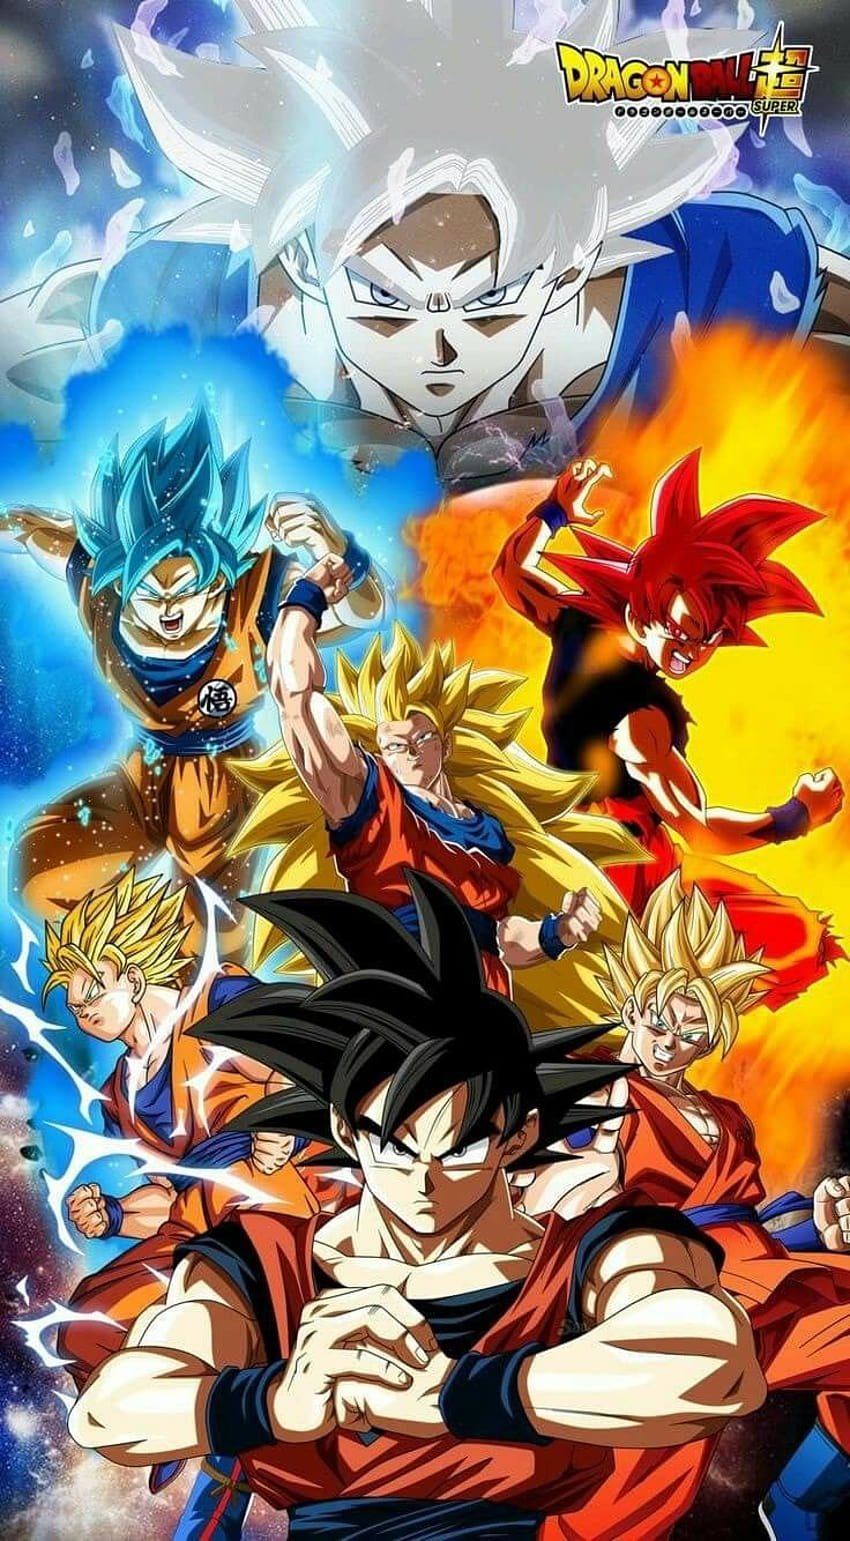 Dragon Ball Super Wallpaper - Goku's Evolution by WindyEchoes on